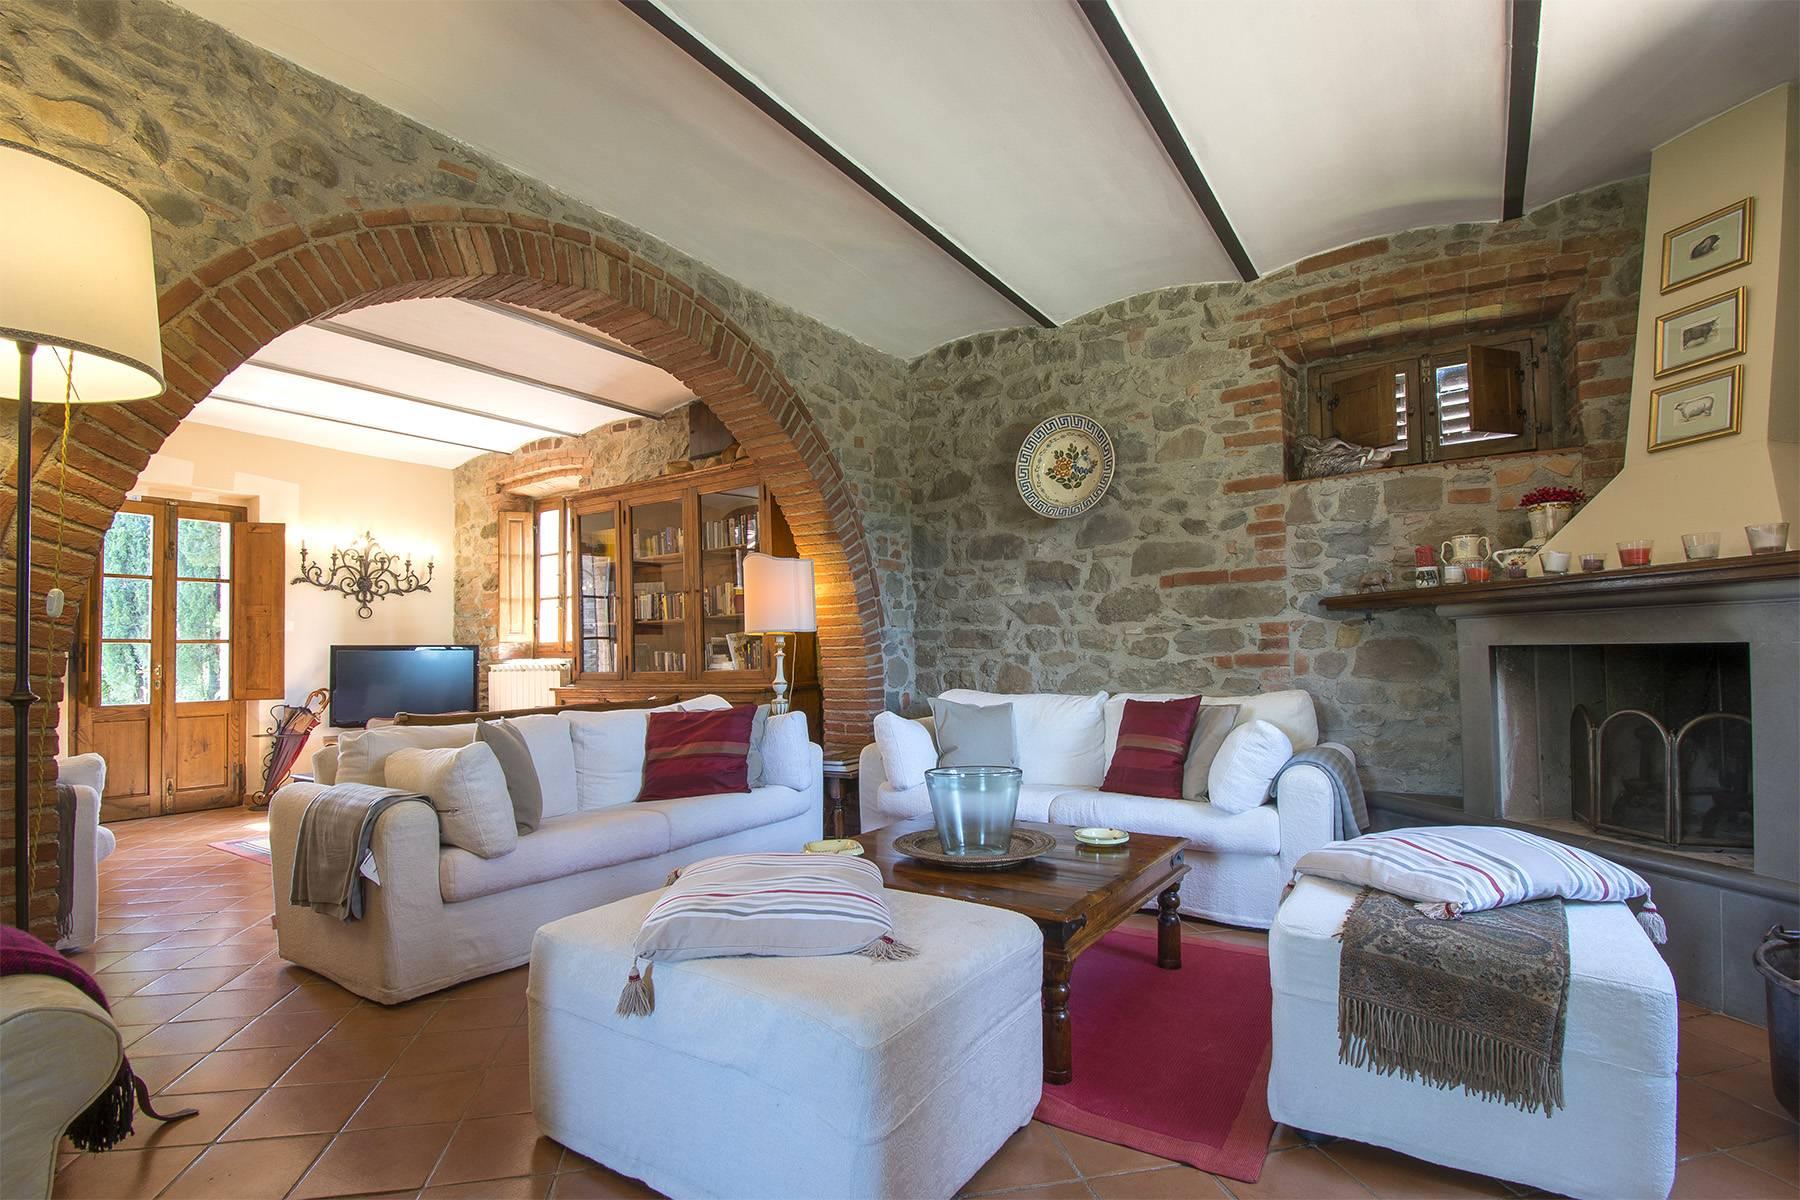 House in the Tuscan Hills for Sale - 10